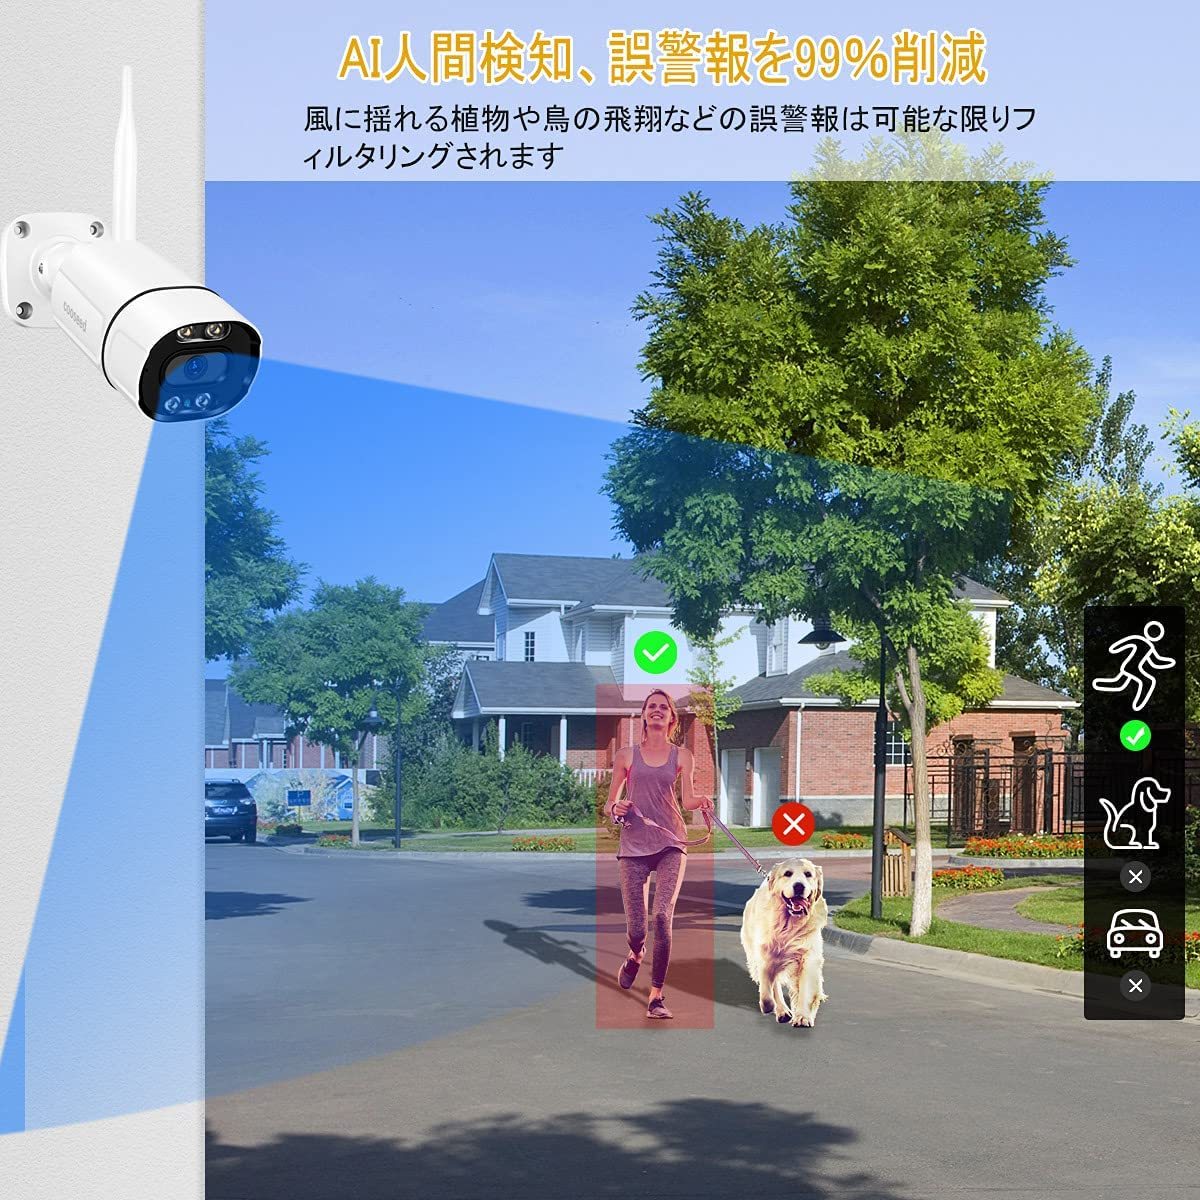 330 500 ten thousand pixels network camera human body detection interactive sound 64GB card built-in dual light source outdoors / indoor security camera IP camera wireless 